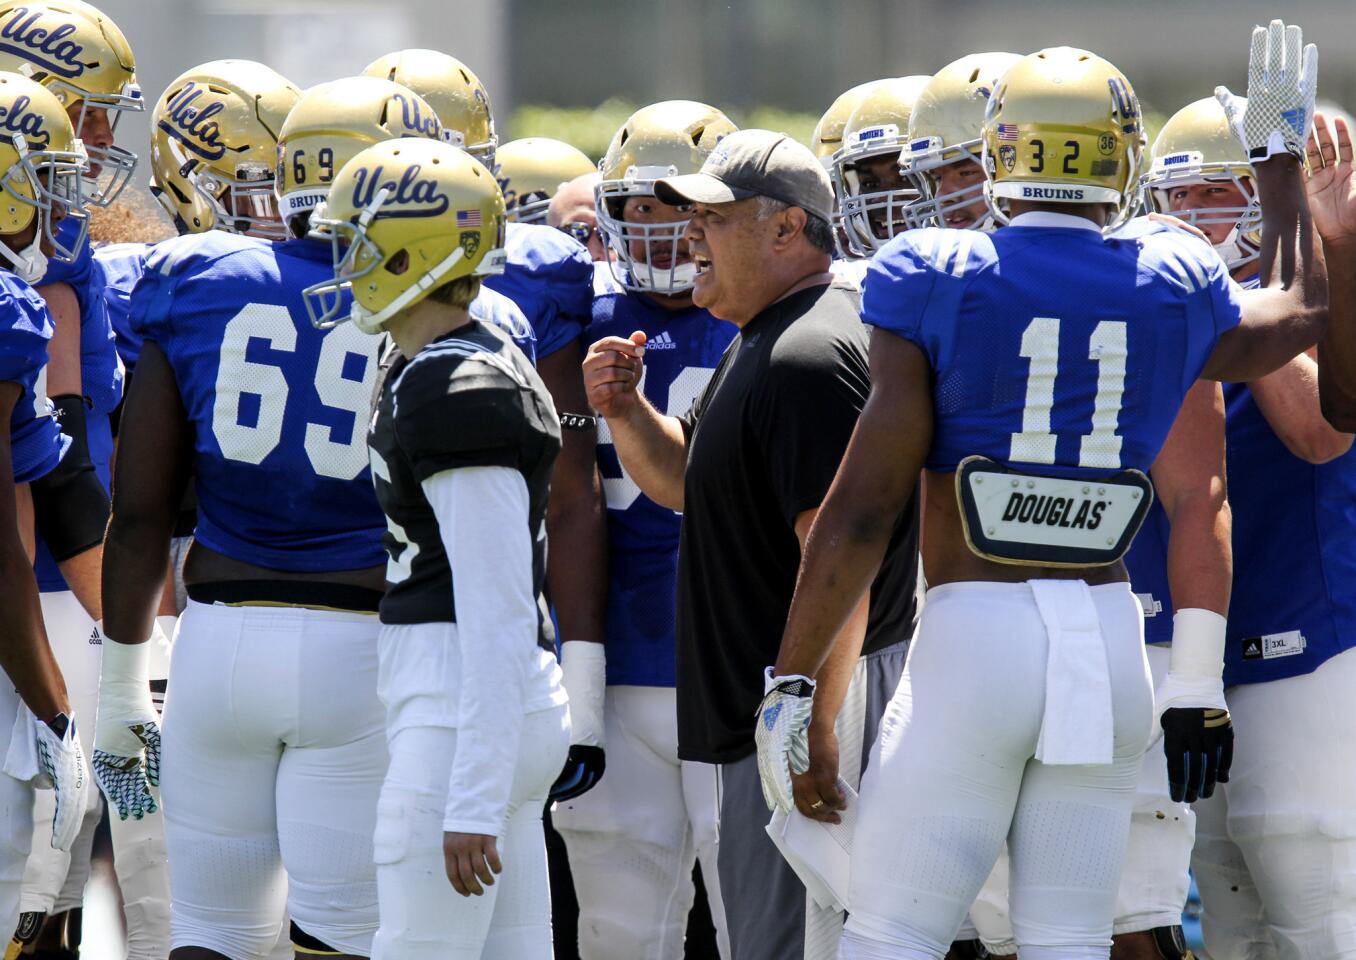 UCLA new offensive coordinator Kennedy Polamalu talks to his team during the UCLA Spring showcase on Apr. 23 at Drake Stadium, on the UCLA campus.